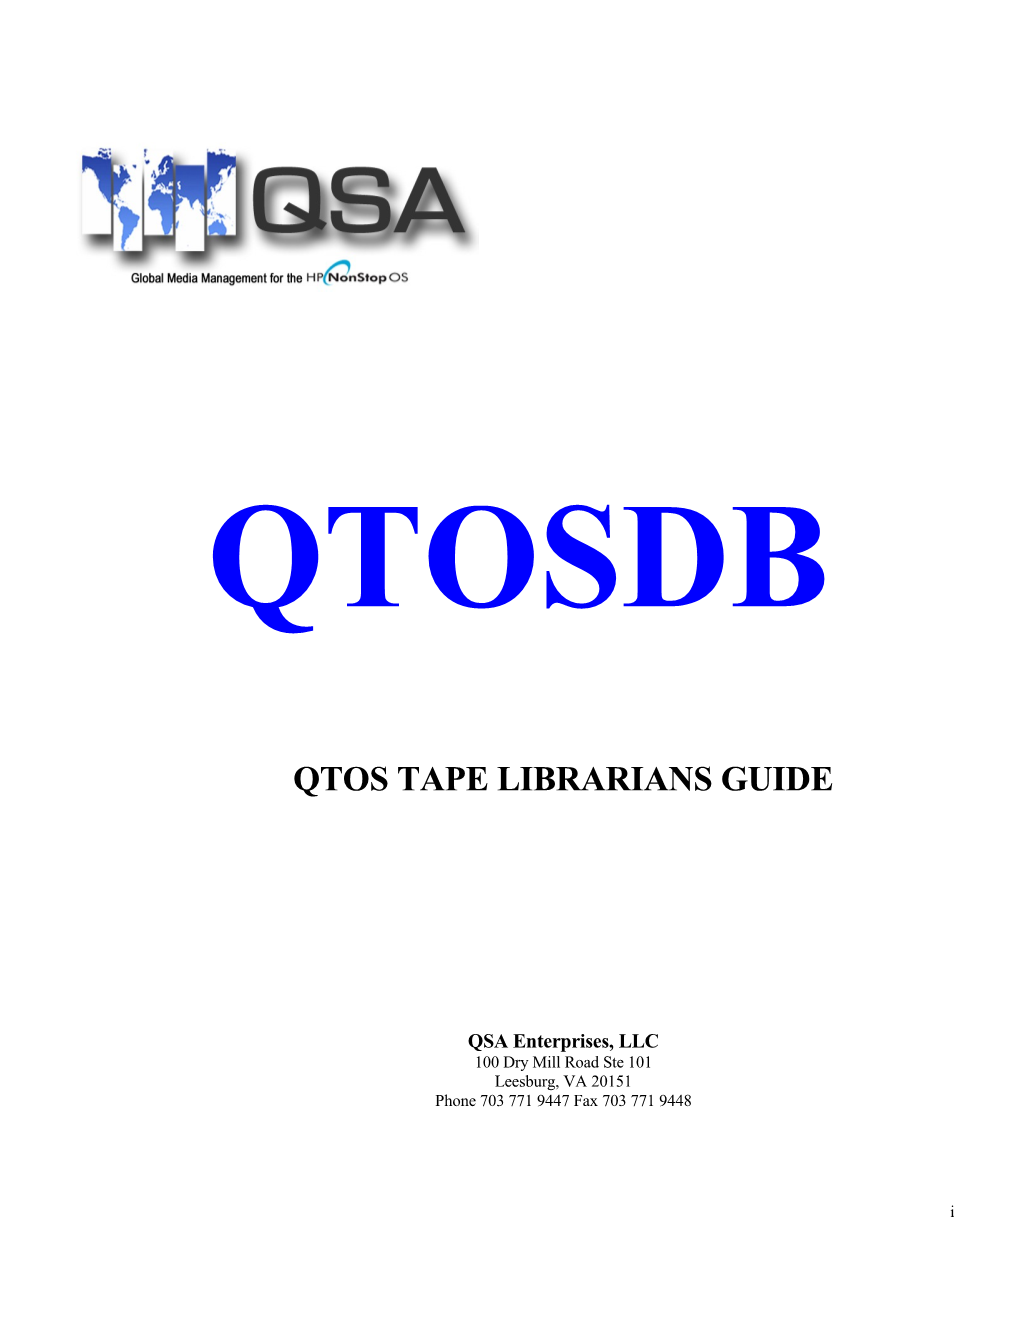 Qtos Tape Librarians Guide